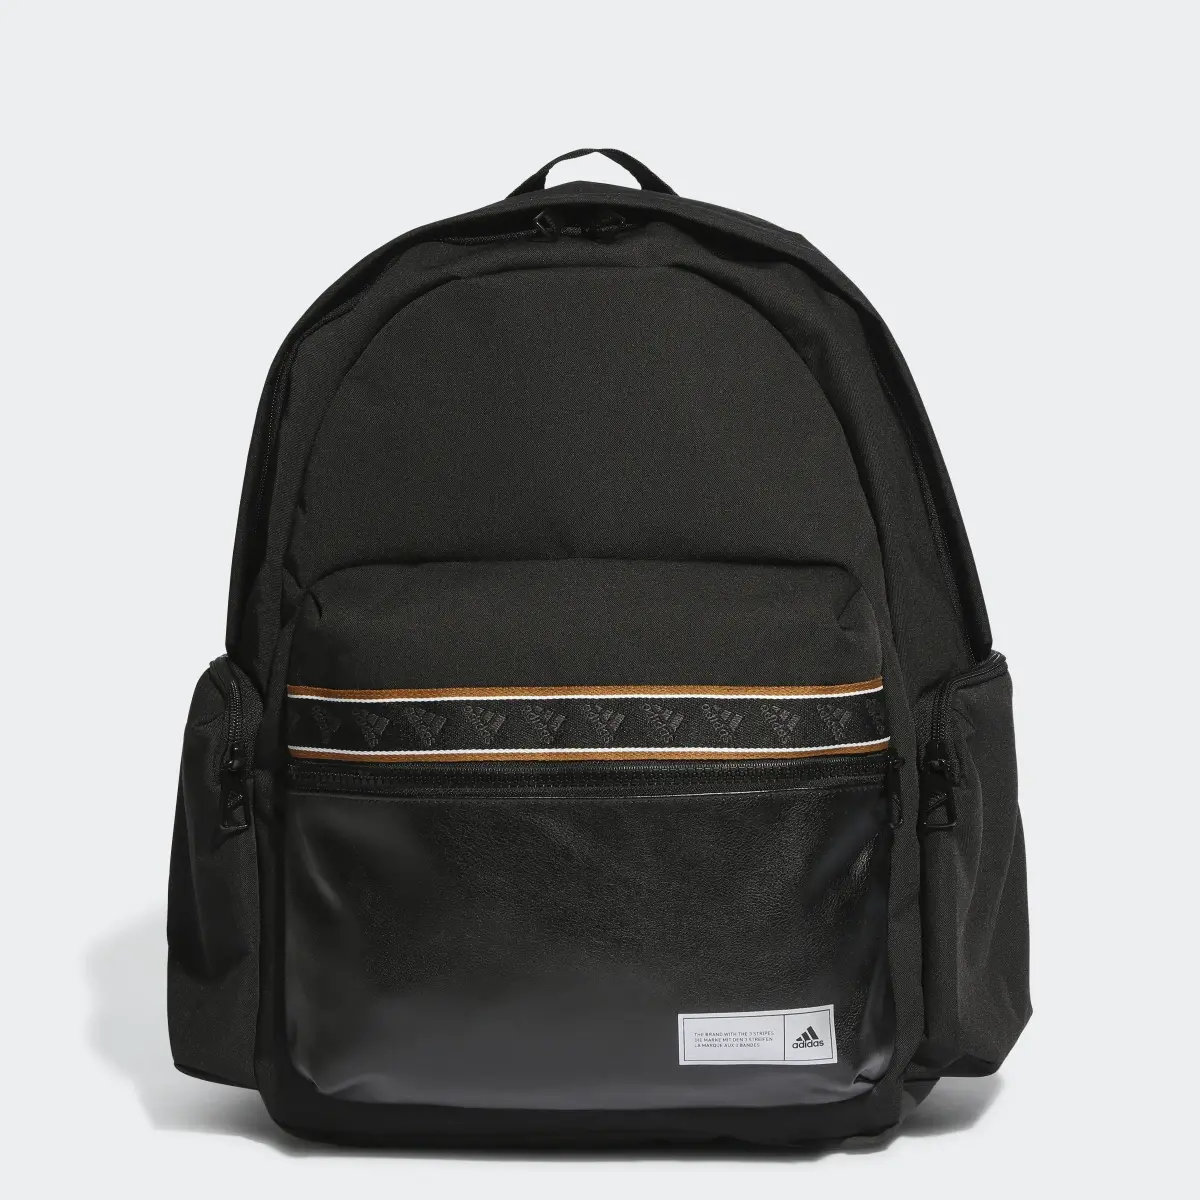 Adidas Back to School Classic Backpack. 1